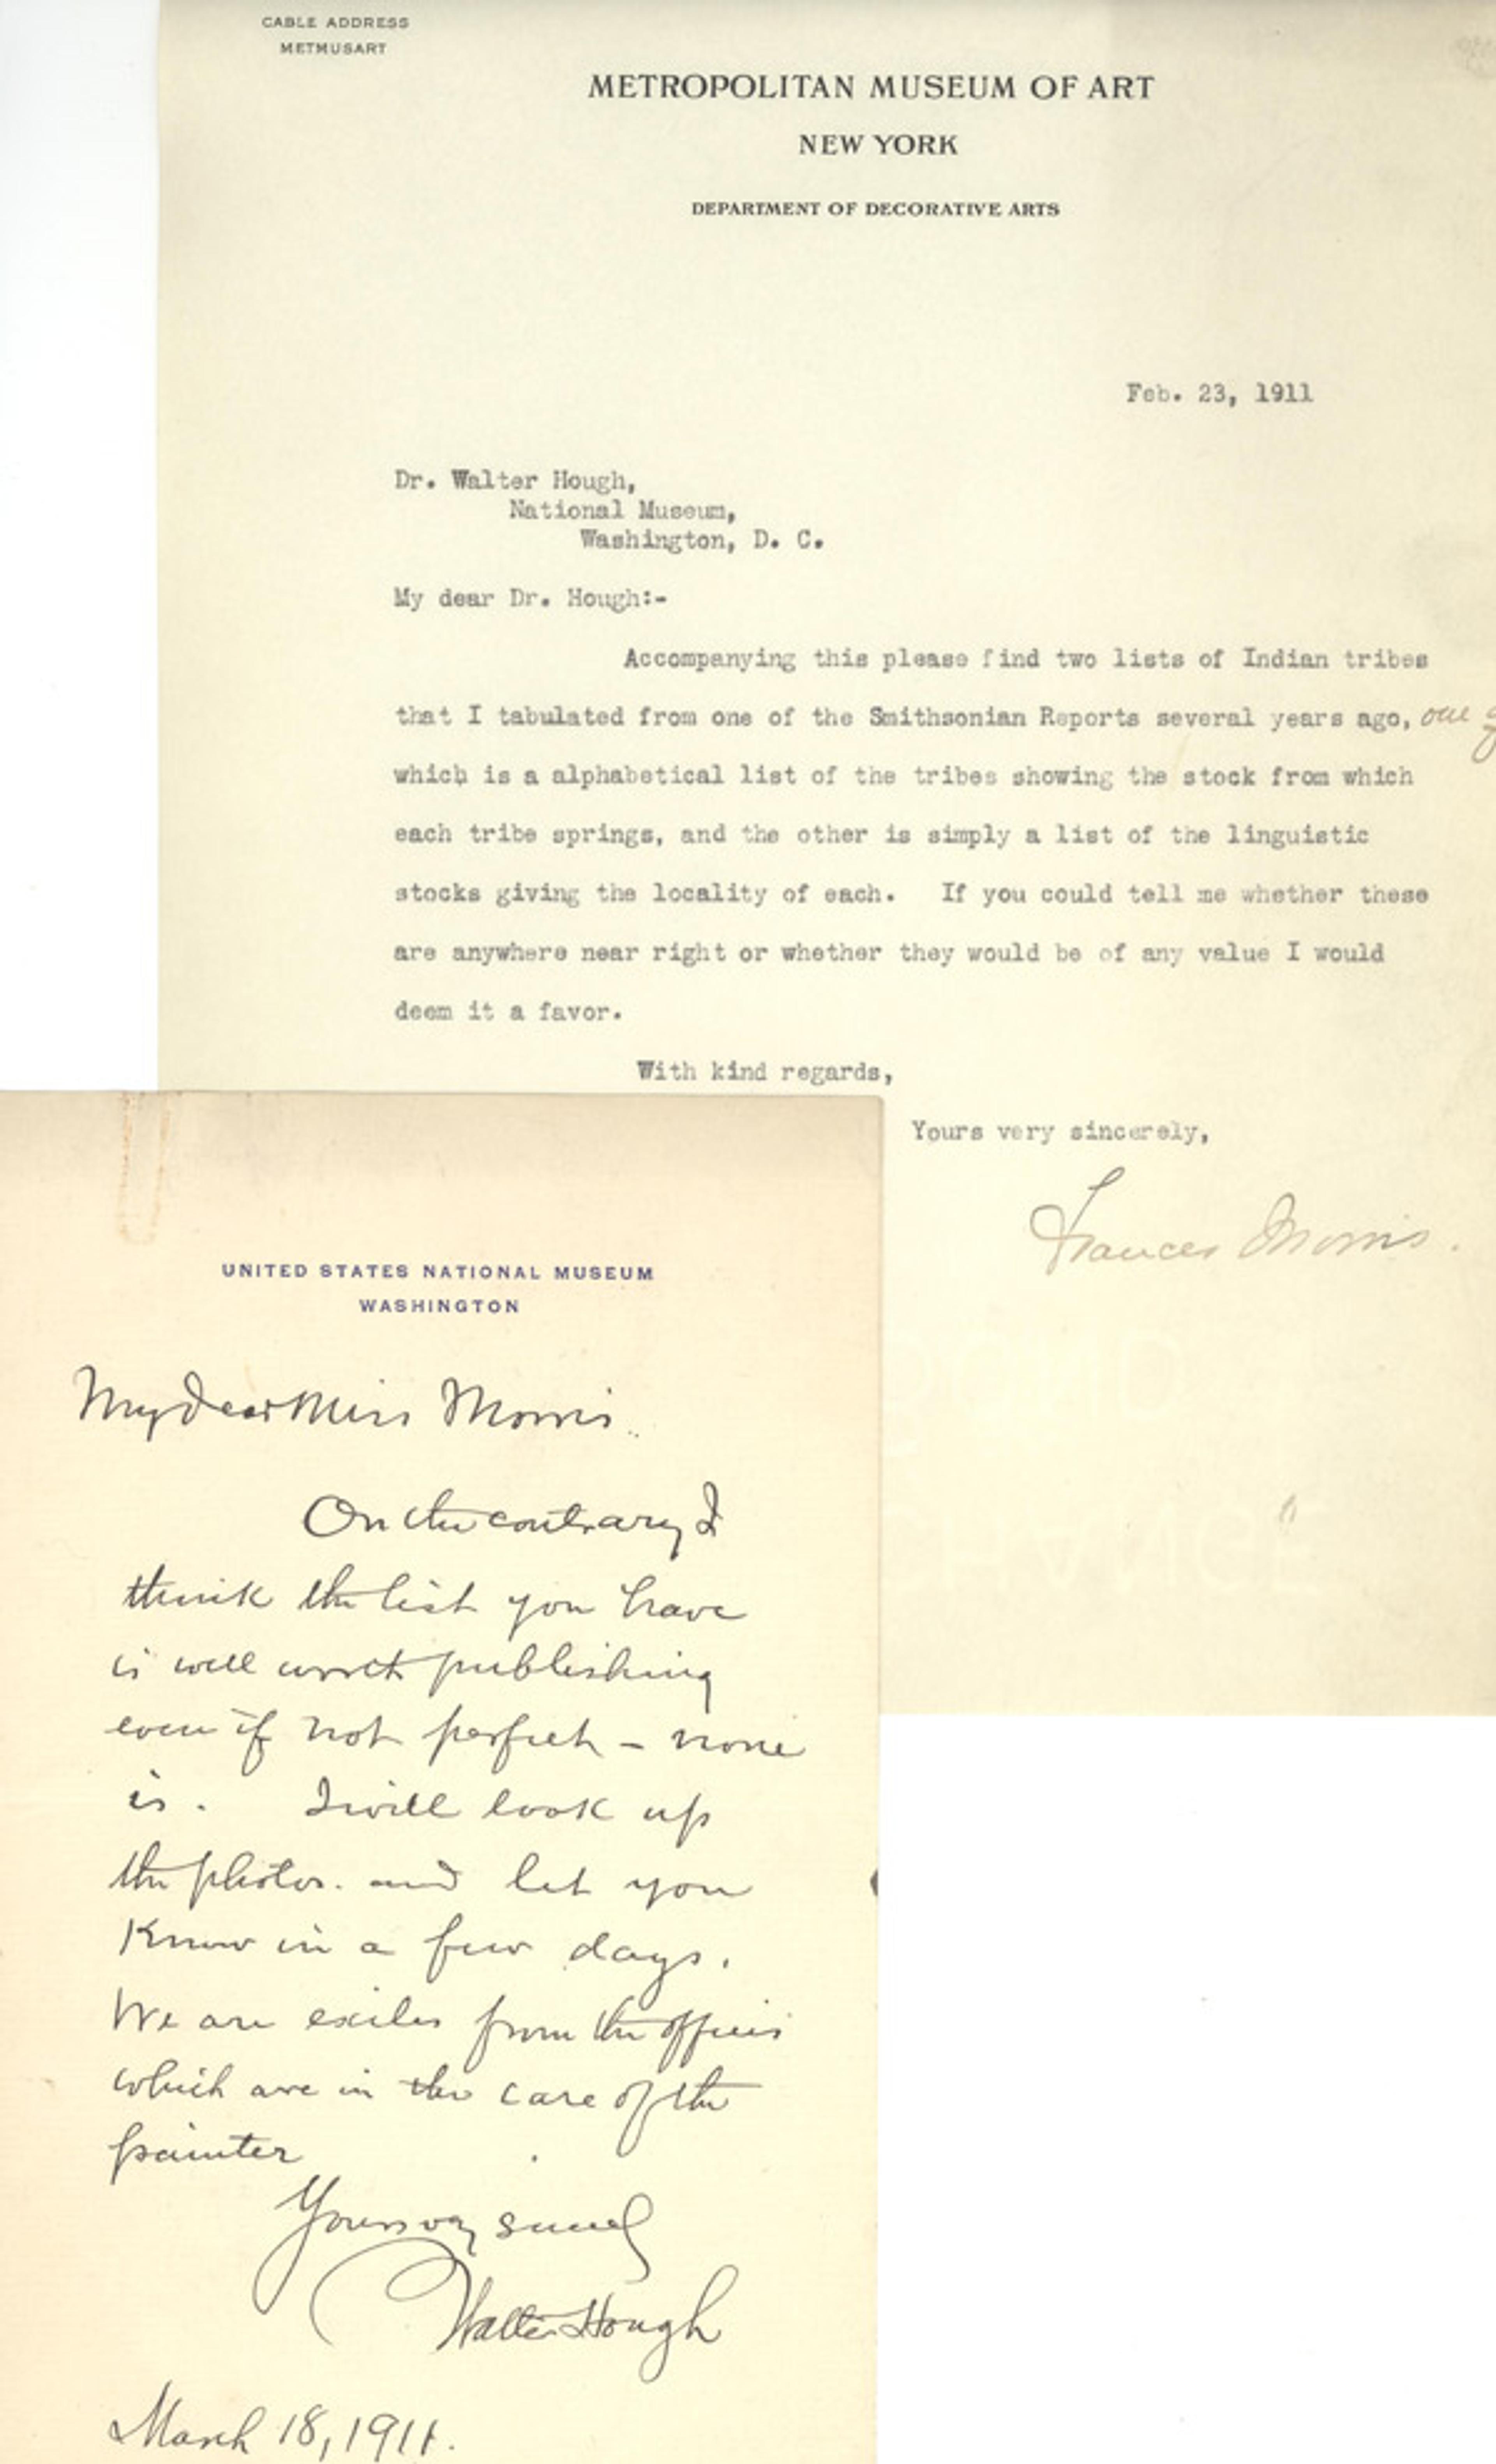 1911 correspondence between Morris and Walter Hough of the National Museum (now the Smithsonian), in which he encourages her to publish her lists of American Indian tribes, compiled while cataloguing the Metropolitan's Indian instruments